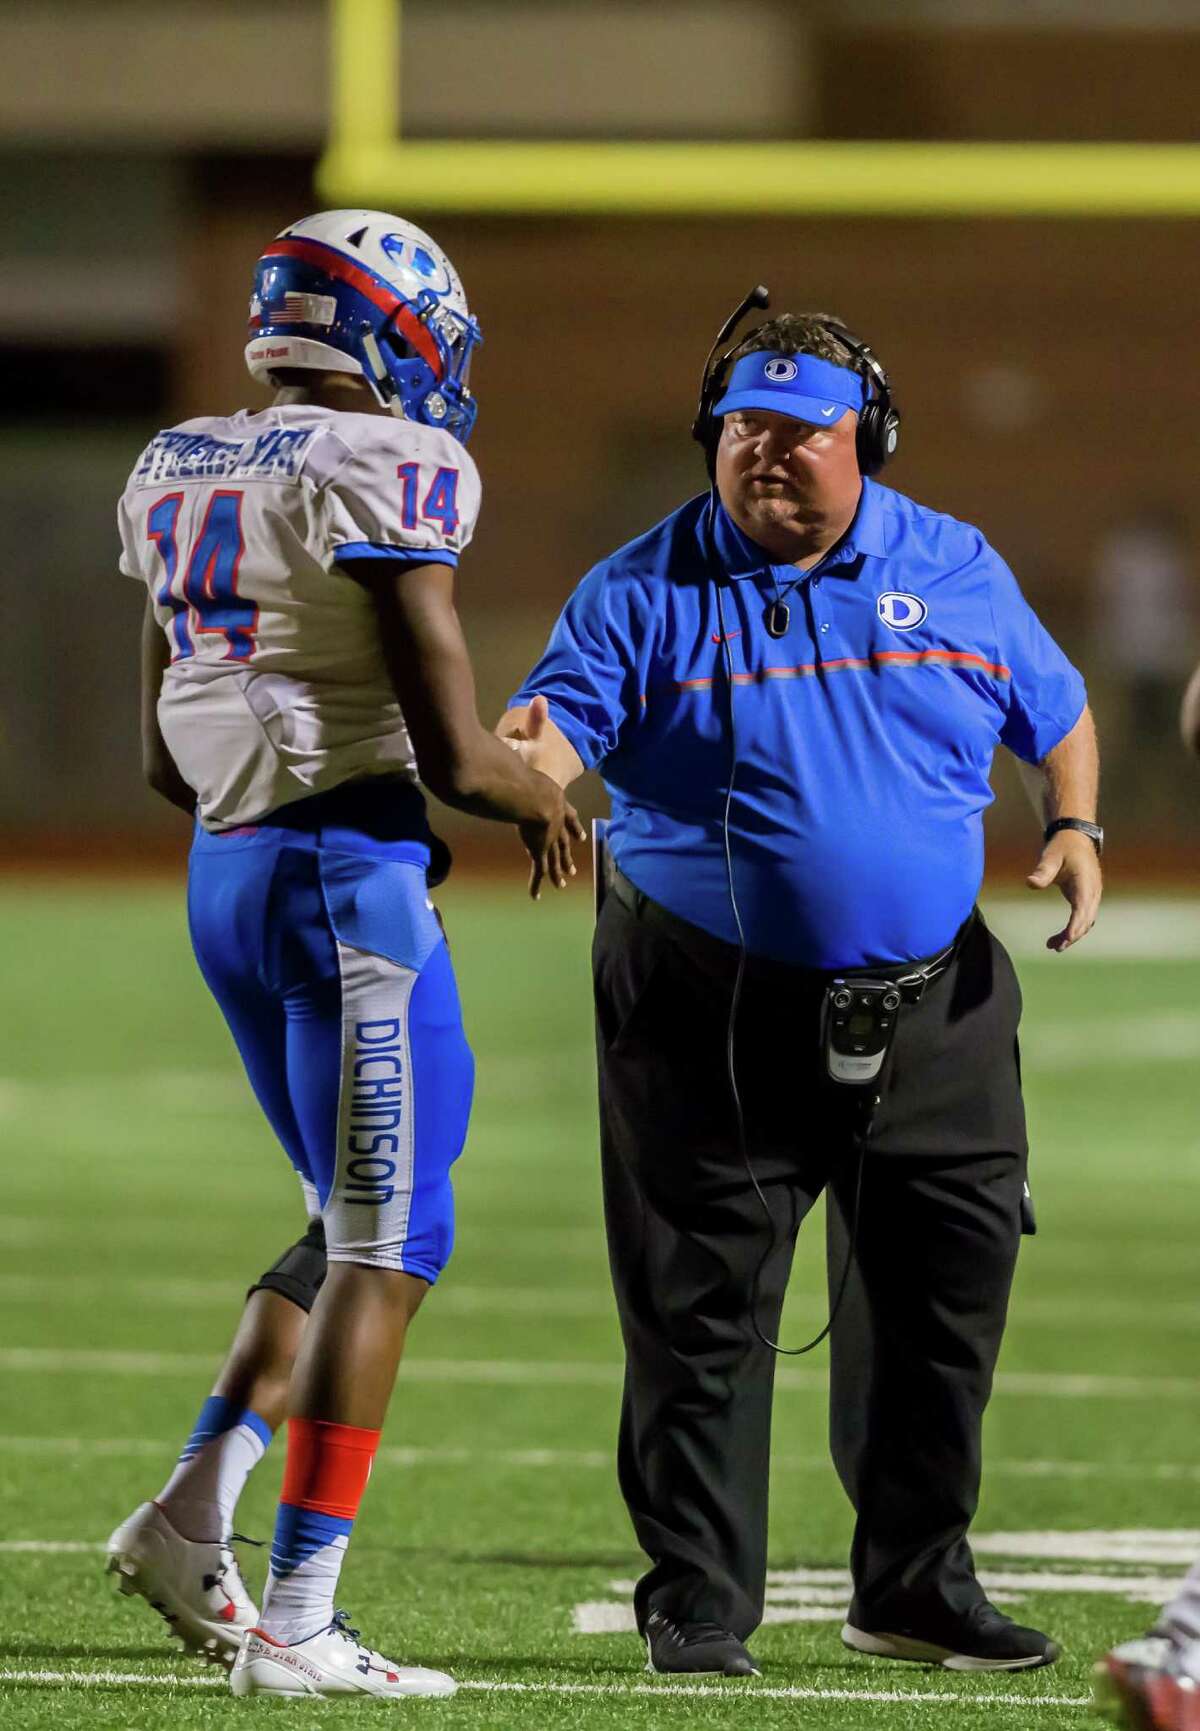 Nov. 12: Dickinson 35, Alief Taylor 21 Dickinson Gators head coach John Snelson congratulates Dickinson Gators Tyrese Wydermyer (14) for making a tackle during the 6A Division 1 playoff game between Alief Taylor and Dickinson at LeRoy Crump Stadium on November 12, 2016 in Houston, Texas. (Leslie Plaza Johnson/Freelance)